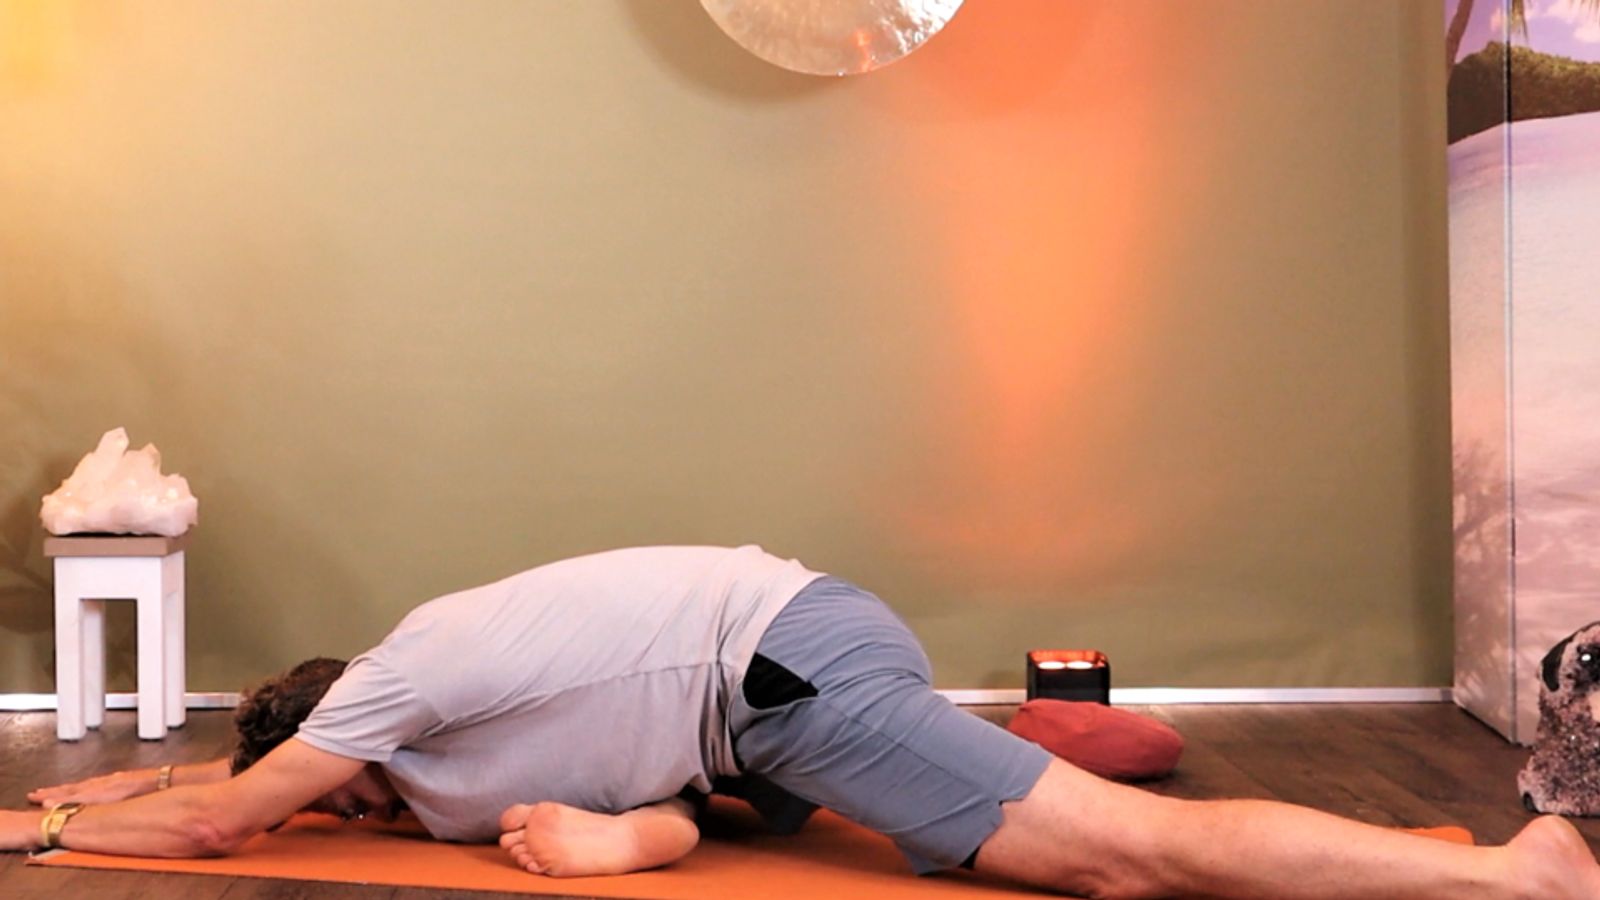 Hip opener full class - let go of stress and misbalance and arrive 100% in the now